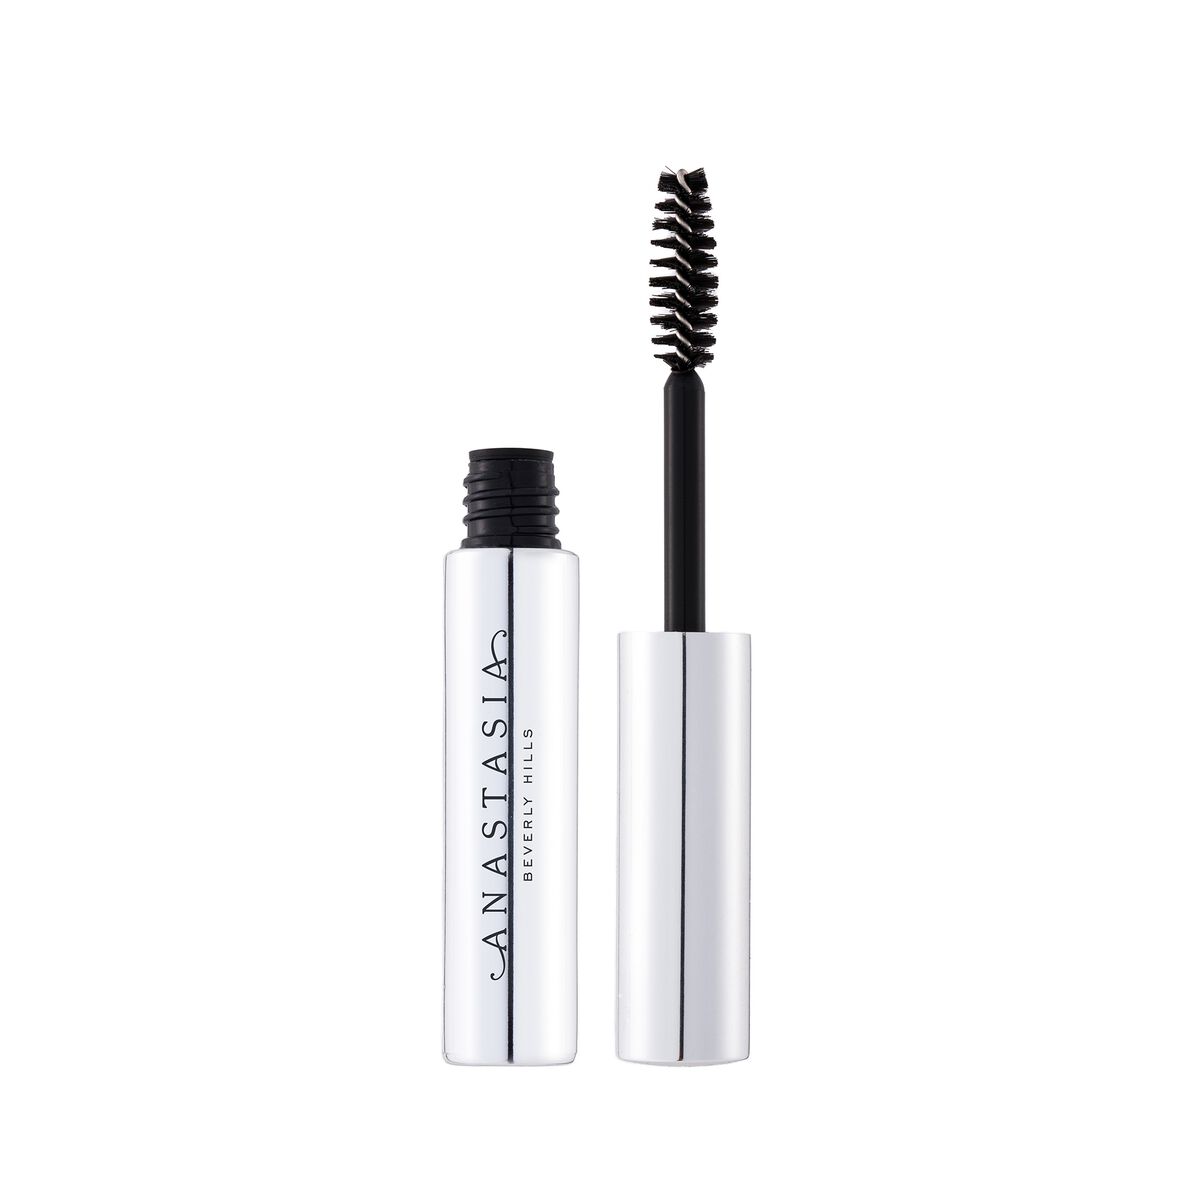 look cejas invisibles clear brow anastasia